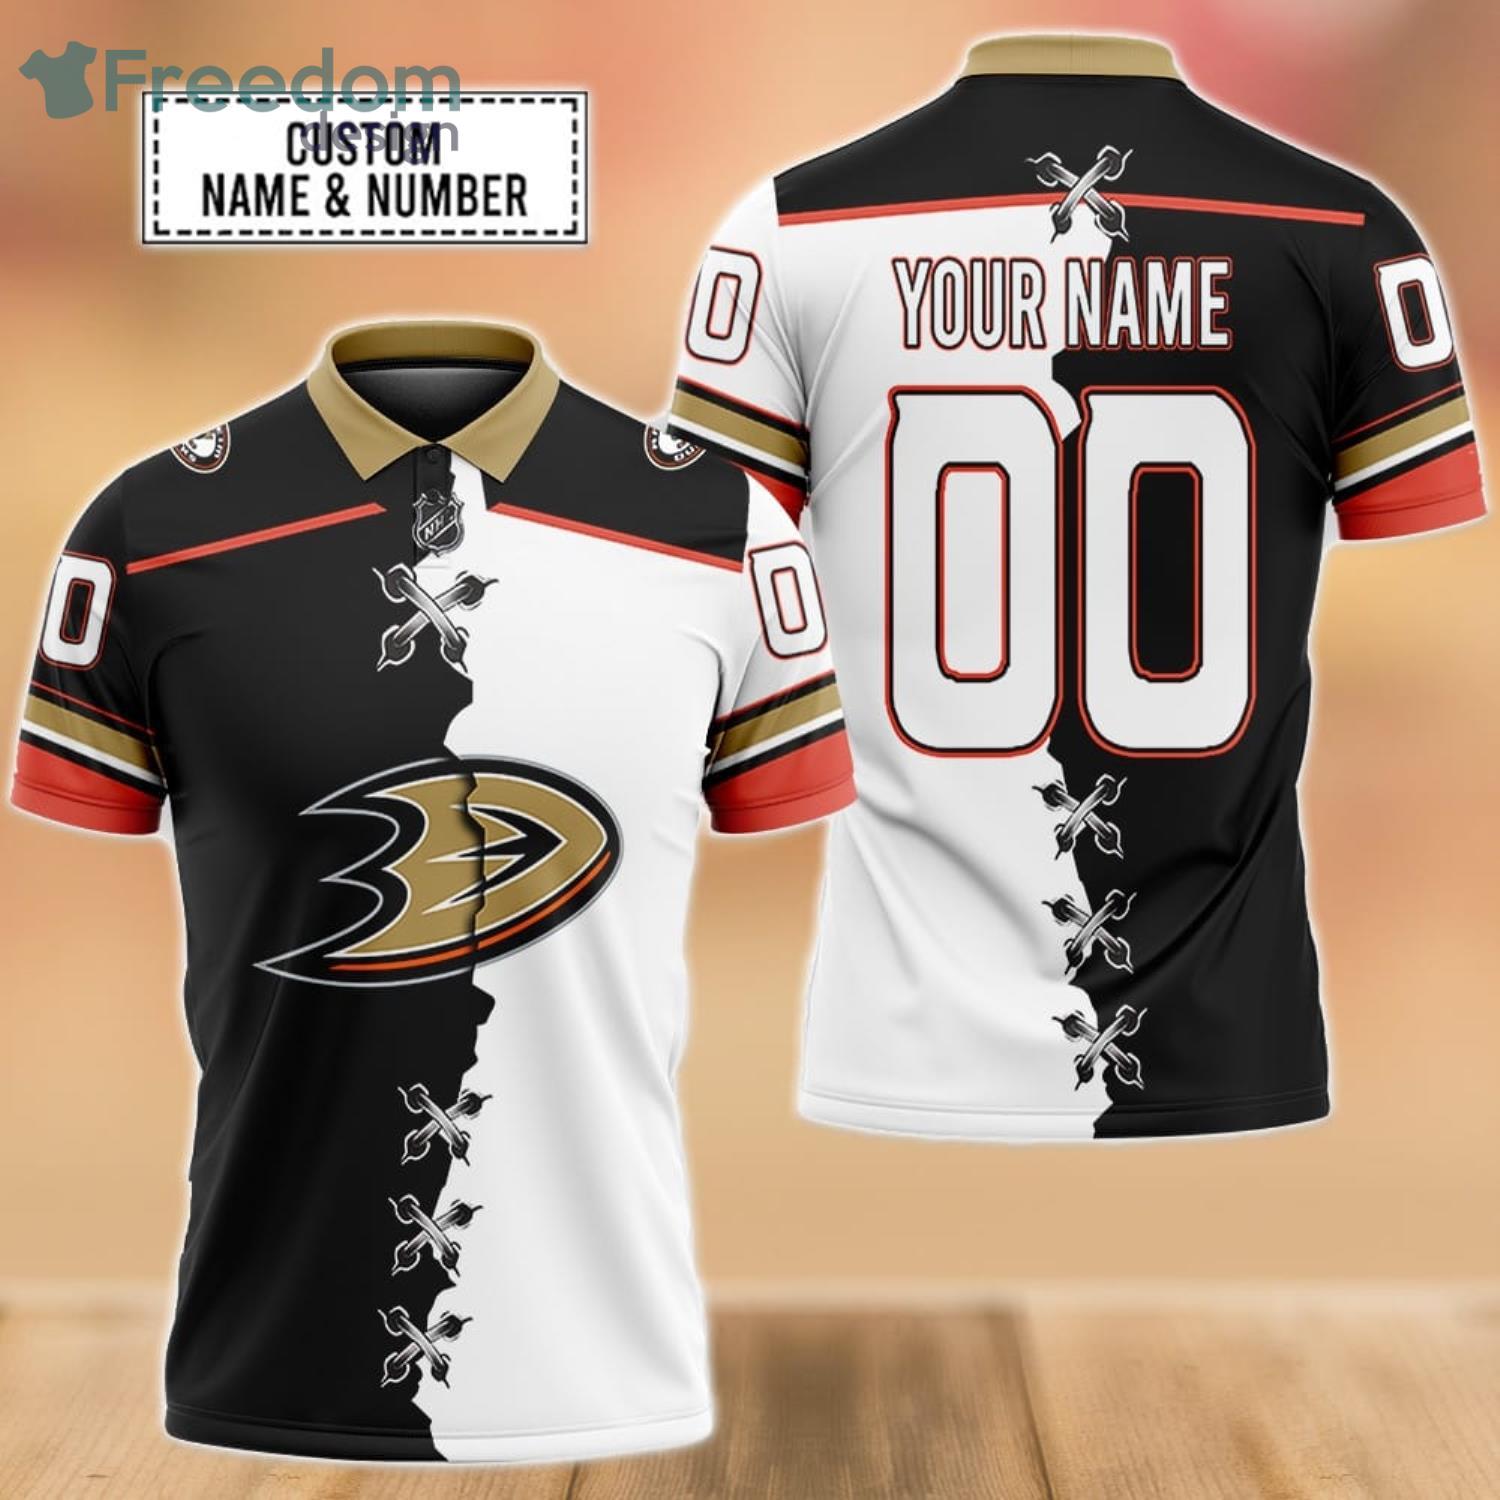 I made a custom Anaheim Ducks jersey as a surprise gift for a